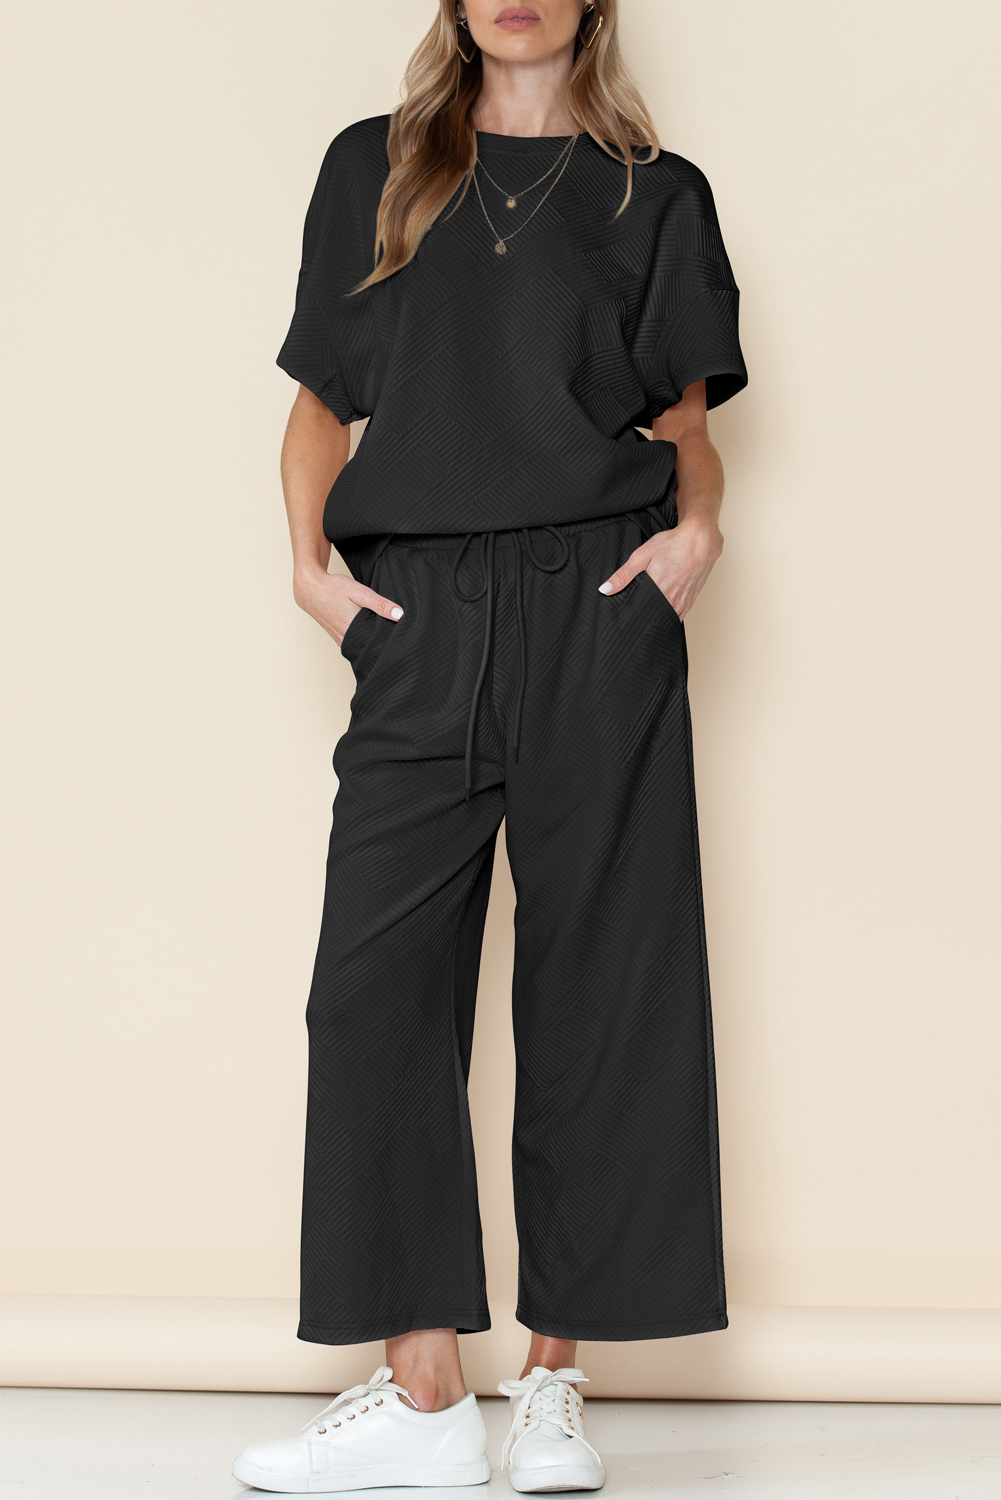 Shewin Wholesale Dropshippers Black Textured Loose Fit T Shirt and Drawstring PANTS Set